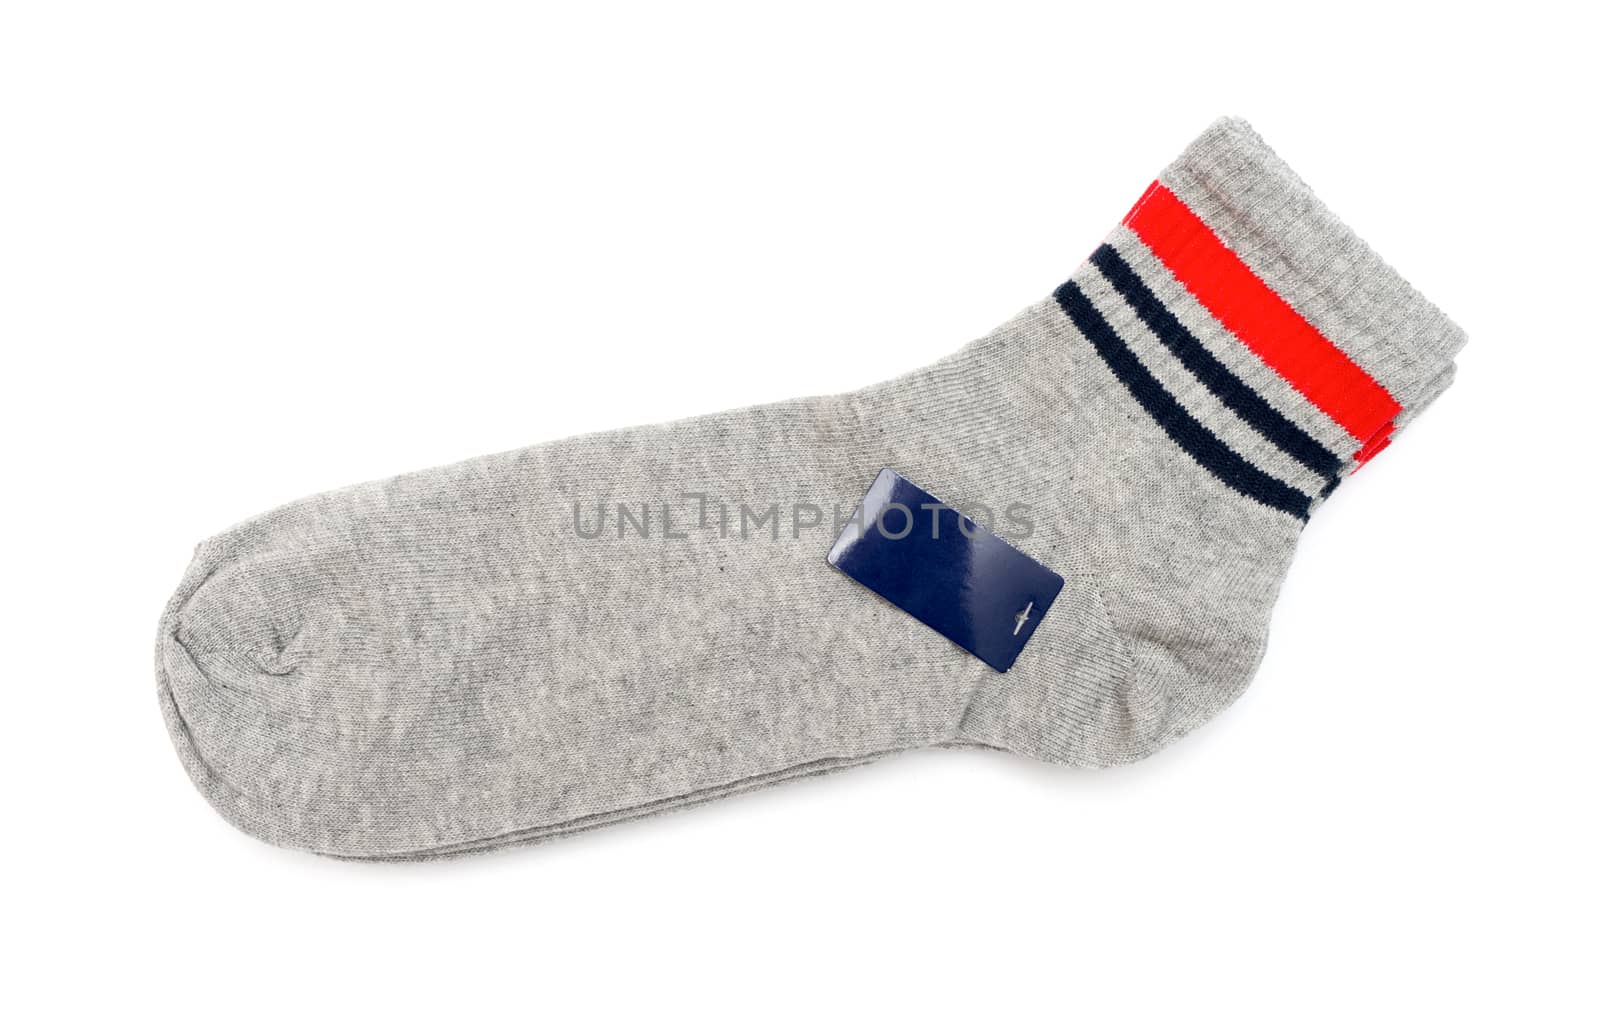 Socks isolated on white background by DNKSTUDIO